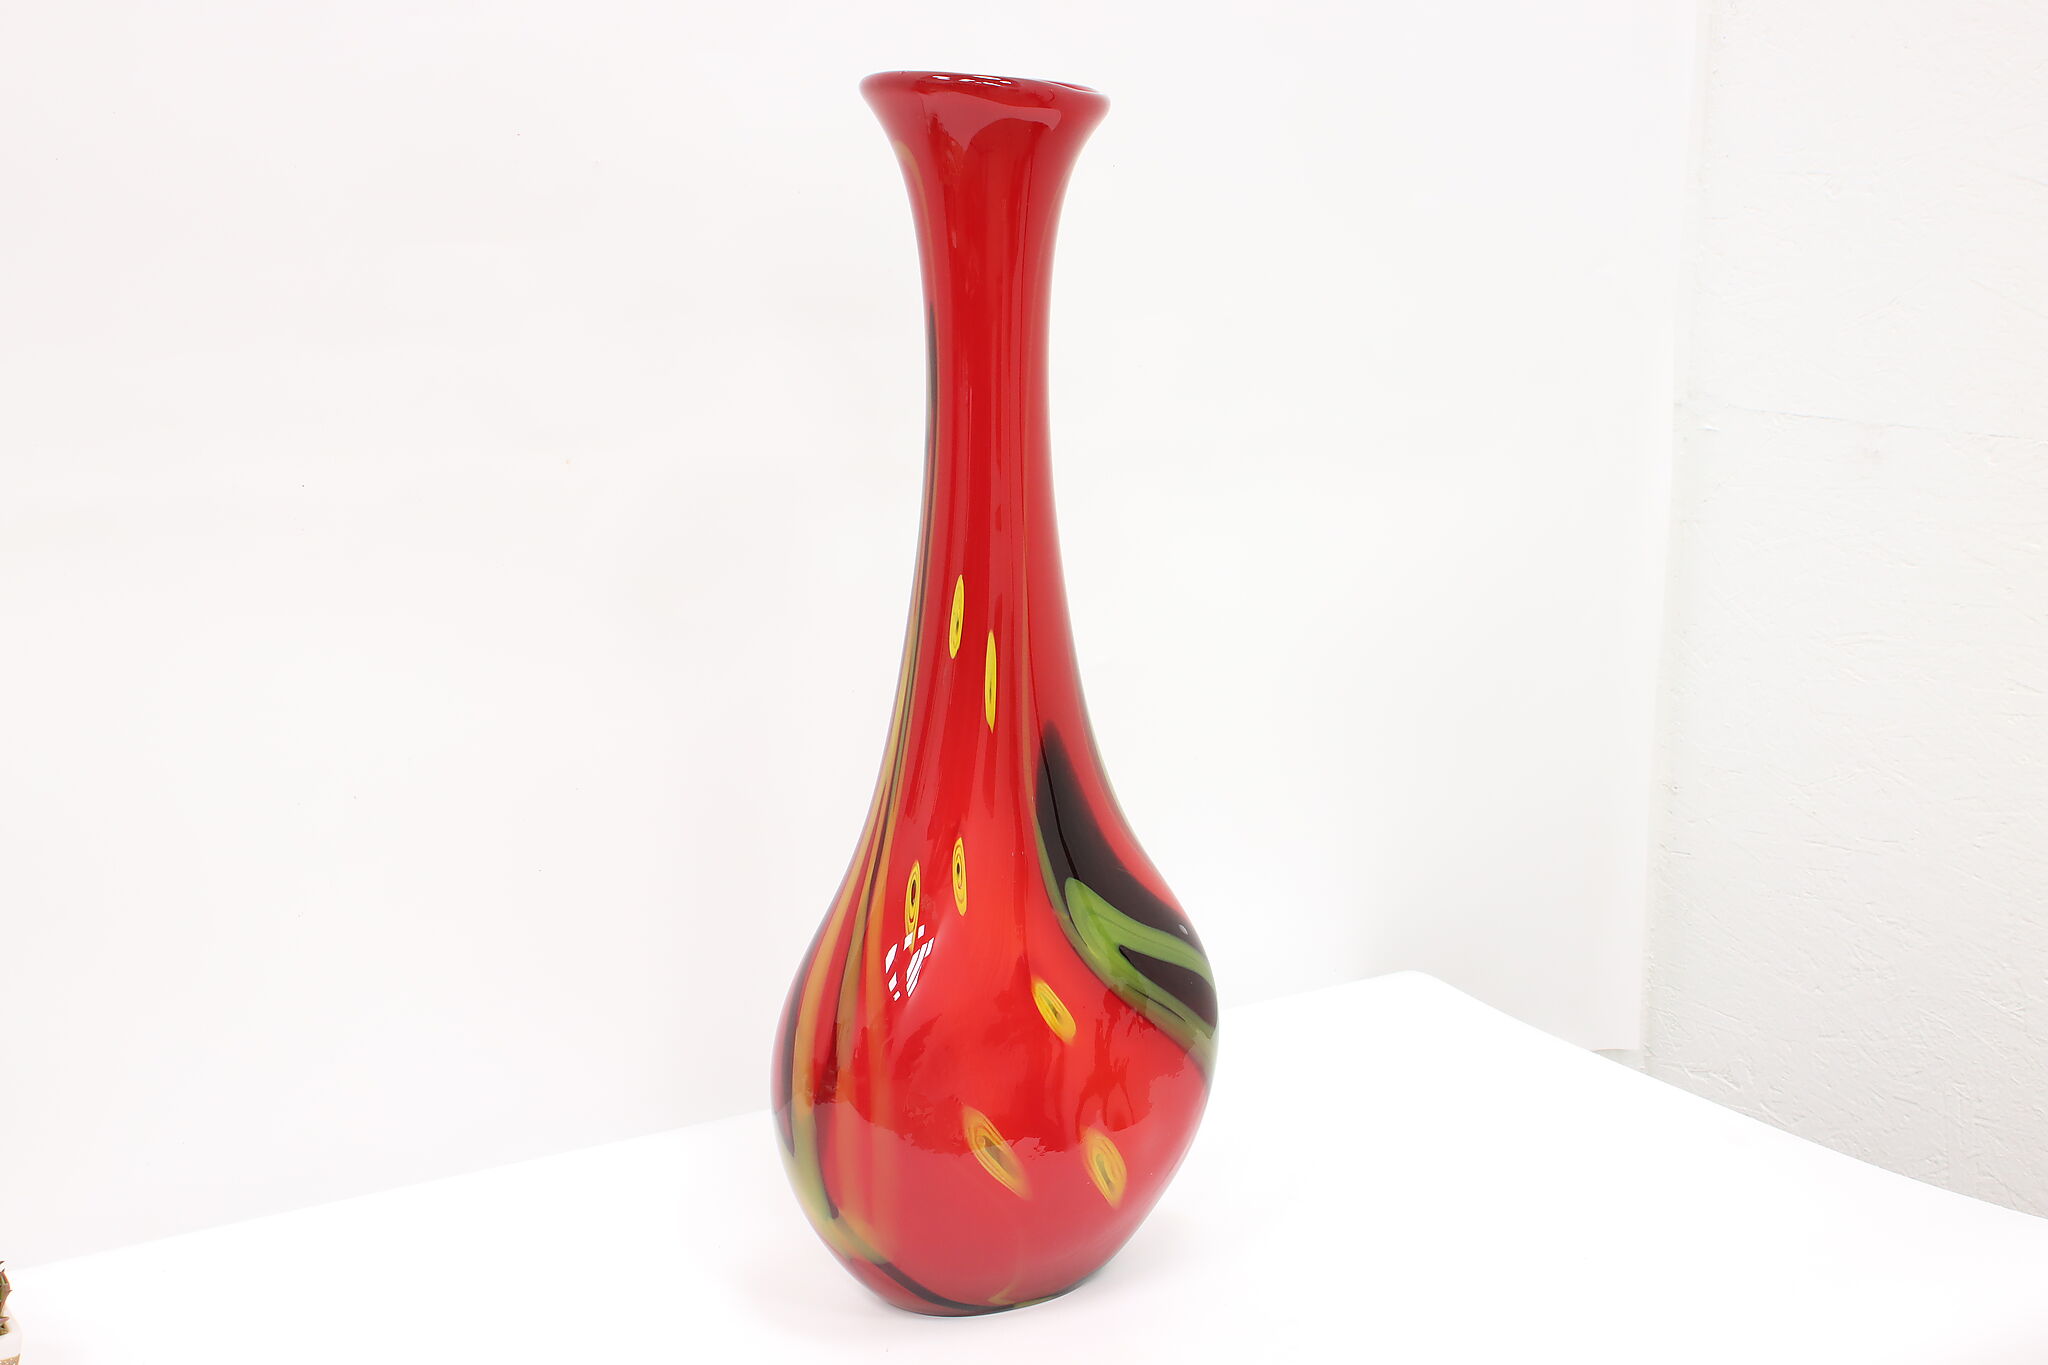 Vintage Glass Vase with Multi-Colored Swirls - Lost and Found